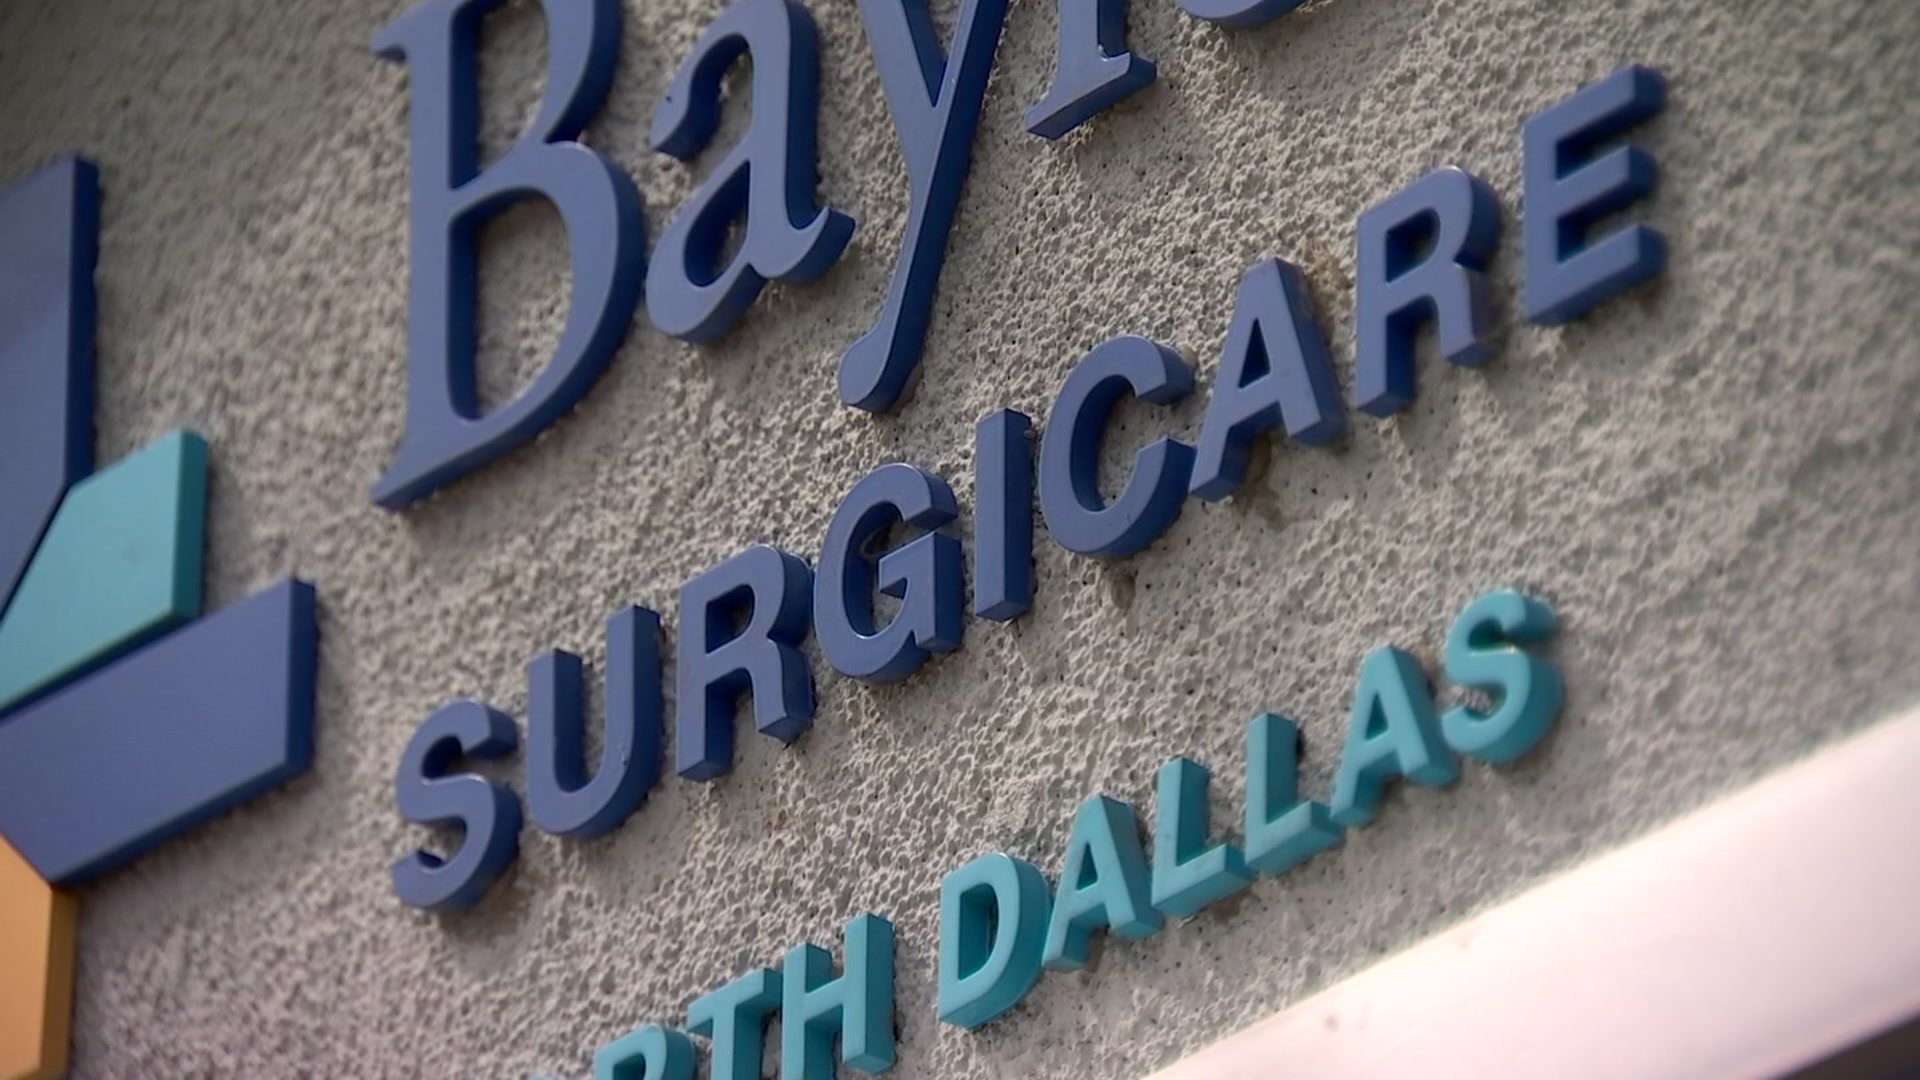 Surgery center pauses operations due to 'compromised' IV bag